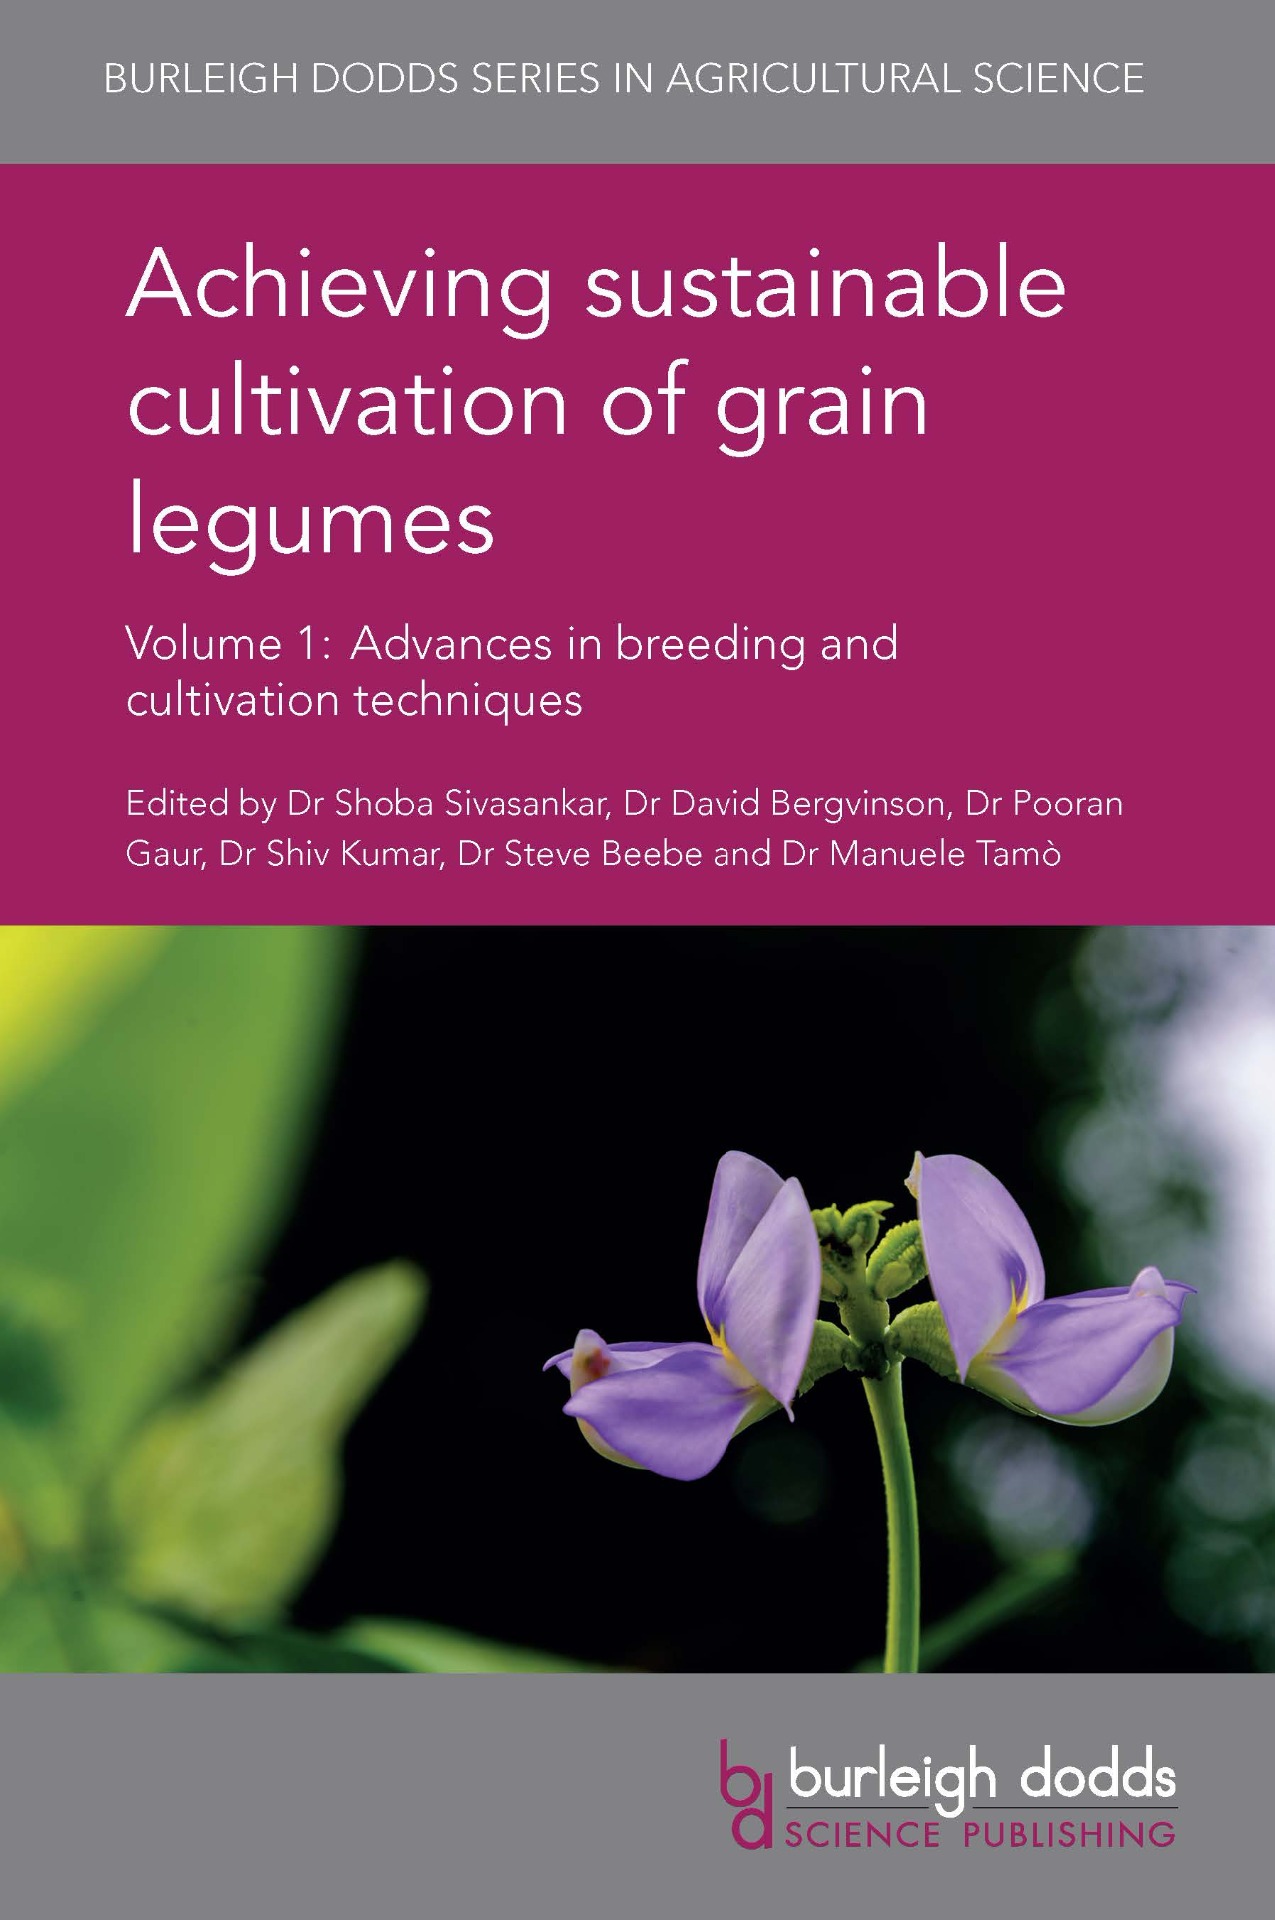 Achieving sustainable cultivation of grain legumes Volume 1